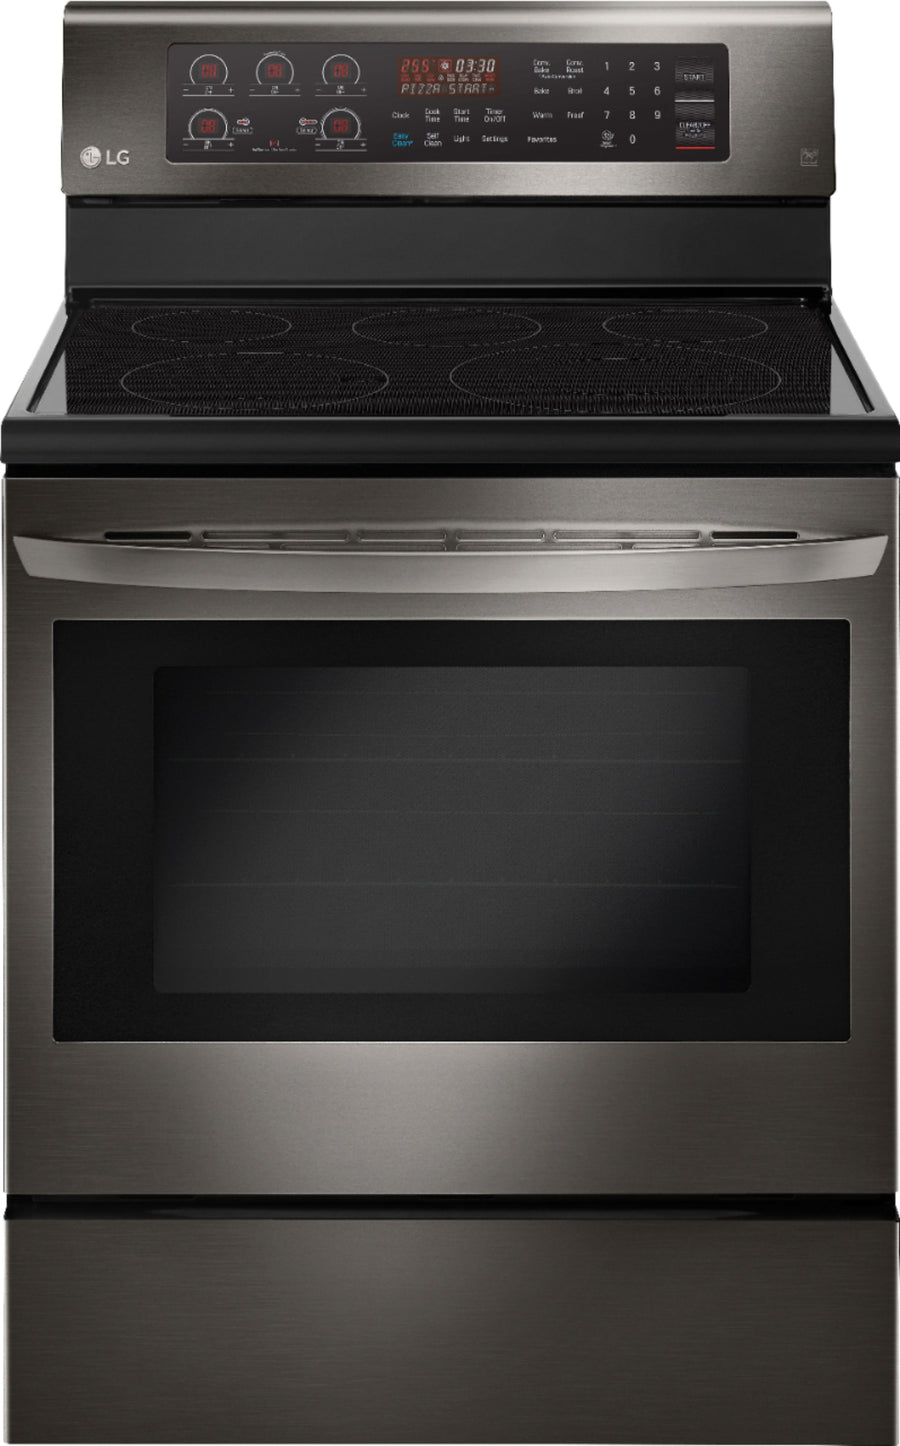 LG - 6.3 Cu. Ft. Self-Cleaning Freestanding Electric Convection Range with EasyClean - Black Stainless Steel_0